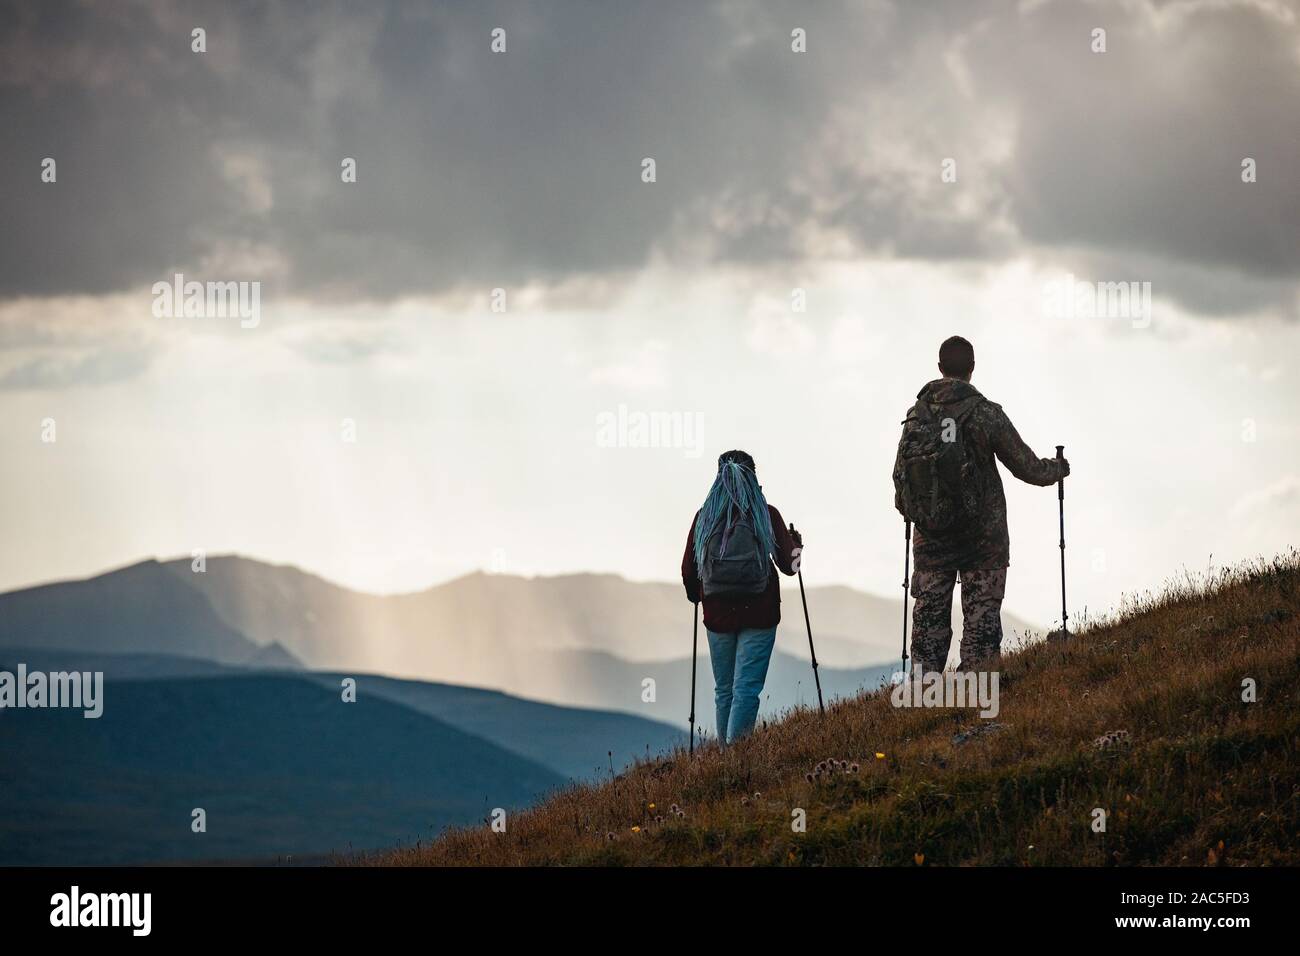 Couple of unrecognised hikers silhouettes stands with trekking poles in mountains Stock Photo